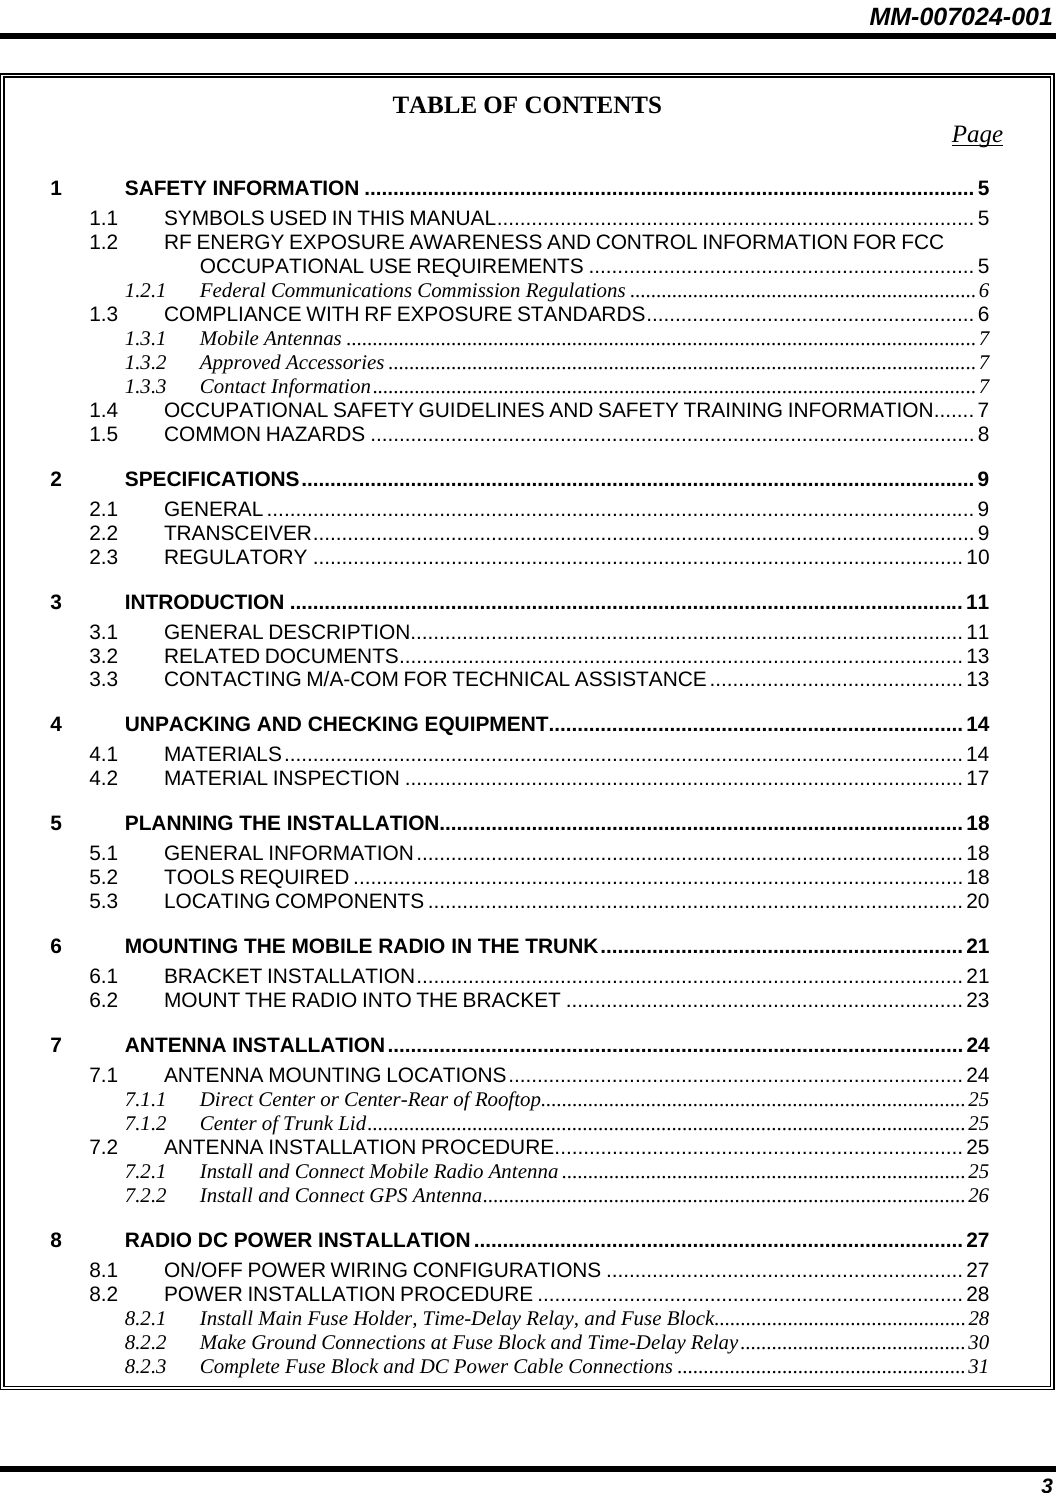 MM-007024-001 3 TABLE OF CONTENTS  Page 1 SAFETY INFORMATION .......................................................................................................... 5 1.1 SYMBOLS USED IN THIS MANUAL................................................................................... 5 1.2 RF ENERGY EXPOSURE AWARENESS AND CONTROL INFORMATION FOR FCC OCCUPATIONAL USE REQUIREMENTS ................................................................... 5 1.2.1 Federal Communications Commission Regulations ..................................................................6 1.3 COMPLIANCE WITH RF EXPOSURE STANDARDS......................................................... 6 1.3.1 Mobile Antennas ........................................................................................................................7 1.3.2 Approved Accessories ................................................................................................................7 1.3.3 Contact Information...................................................................................................................7 1.4 OCCUPATIONAL SAFETY GUIDELINES AND SAFETY TRAINING INFORMATION....... 7 1.5 COMMON HAZARDS ......................................................................................................... 8 2 SPECIFICATIONS..................................................................................................................... 9 2.1 GENERAL ........................................................................................................................... 9 2.2 TRANSCEIVER................................................................................................................... 9 2.3 REGULATORY ................................................................................................................. 10 3 INTRODUCTION .....................................................................................................................11 3.1 GENERAL DESCRIPTION................................................................................................ 11 3.2 RELATED DOCUMENTS.................................................................................................. 13 3.3 CONTACTING M/A-COM FOR TECHNICAL ASSISTANCE............................................ 13 4 UNPACKING AND CHECKING EQUIPMENT........................................................................14 4.1 MATERIALS......................................................................................................................14 4.2 MATERIAL INSPECTION ................................................................................................. 17 5 PLANNING THE INSTALLATION........................................................................................... 18 5.1 GENERAL INFORMATION............................................................................................... 18 5.2 TOOLS REQUIRED .......................................................................................................... 18 5.3 LOCATING COMPONENTS ............................................................................................. 20 6 MOUNTING THE MOBILE RADIO IN THE TRUNK............................................................... 21 6.1 BRACKET INSTALLATION............................................................................................... 21 6.2 MOUNT THE RADIO INTO THE BRACKET ..................................................................... 23 7 ANTENNA INSTALLATION.................................................................................................... 24 7.1 ANTENNA MOUNTING LOCATIONS............................................................................... 24 7.1.1 Direct Center or Center-Rear of Rooftop.................................................................................25 7.1.2 Center of Trunk Lid..................................................................................................................25 7.2 ANTENNA INSTALLATION PROCEDURE....................................................................... 25 7.2.1 Install and Connect Mobile Radio Antenna .............................................................................25 7.2.2 Install and Connect GPS Antenna............................................................................................26 8 RADIO DC POWER INSTALLATION.....................................................................................27 8.1 ON/OFF POWER WIRING CONFIGURATIONS .............................................................. 27 8.2 POWER INSTALLATION PROCEDURE .......................................................................... 28 8.2.1 Install Main Fuse Holder, Time-Delay Relay, and Fuse Block................................................28 8.2.2 Make Ground Connections at Fuse Block and Time-Delay Relay...........................................30 8.2.3 Complete Fuse Block and DC Power Cable Connections .......................................................31 